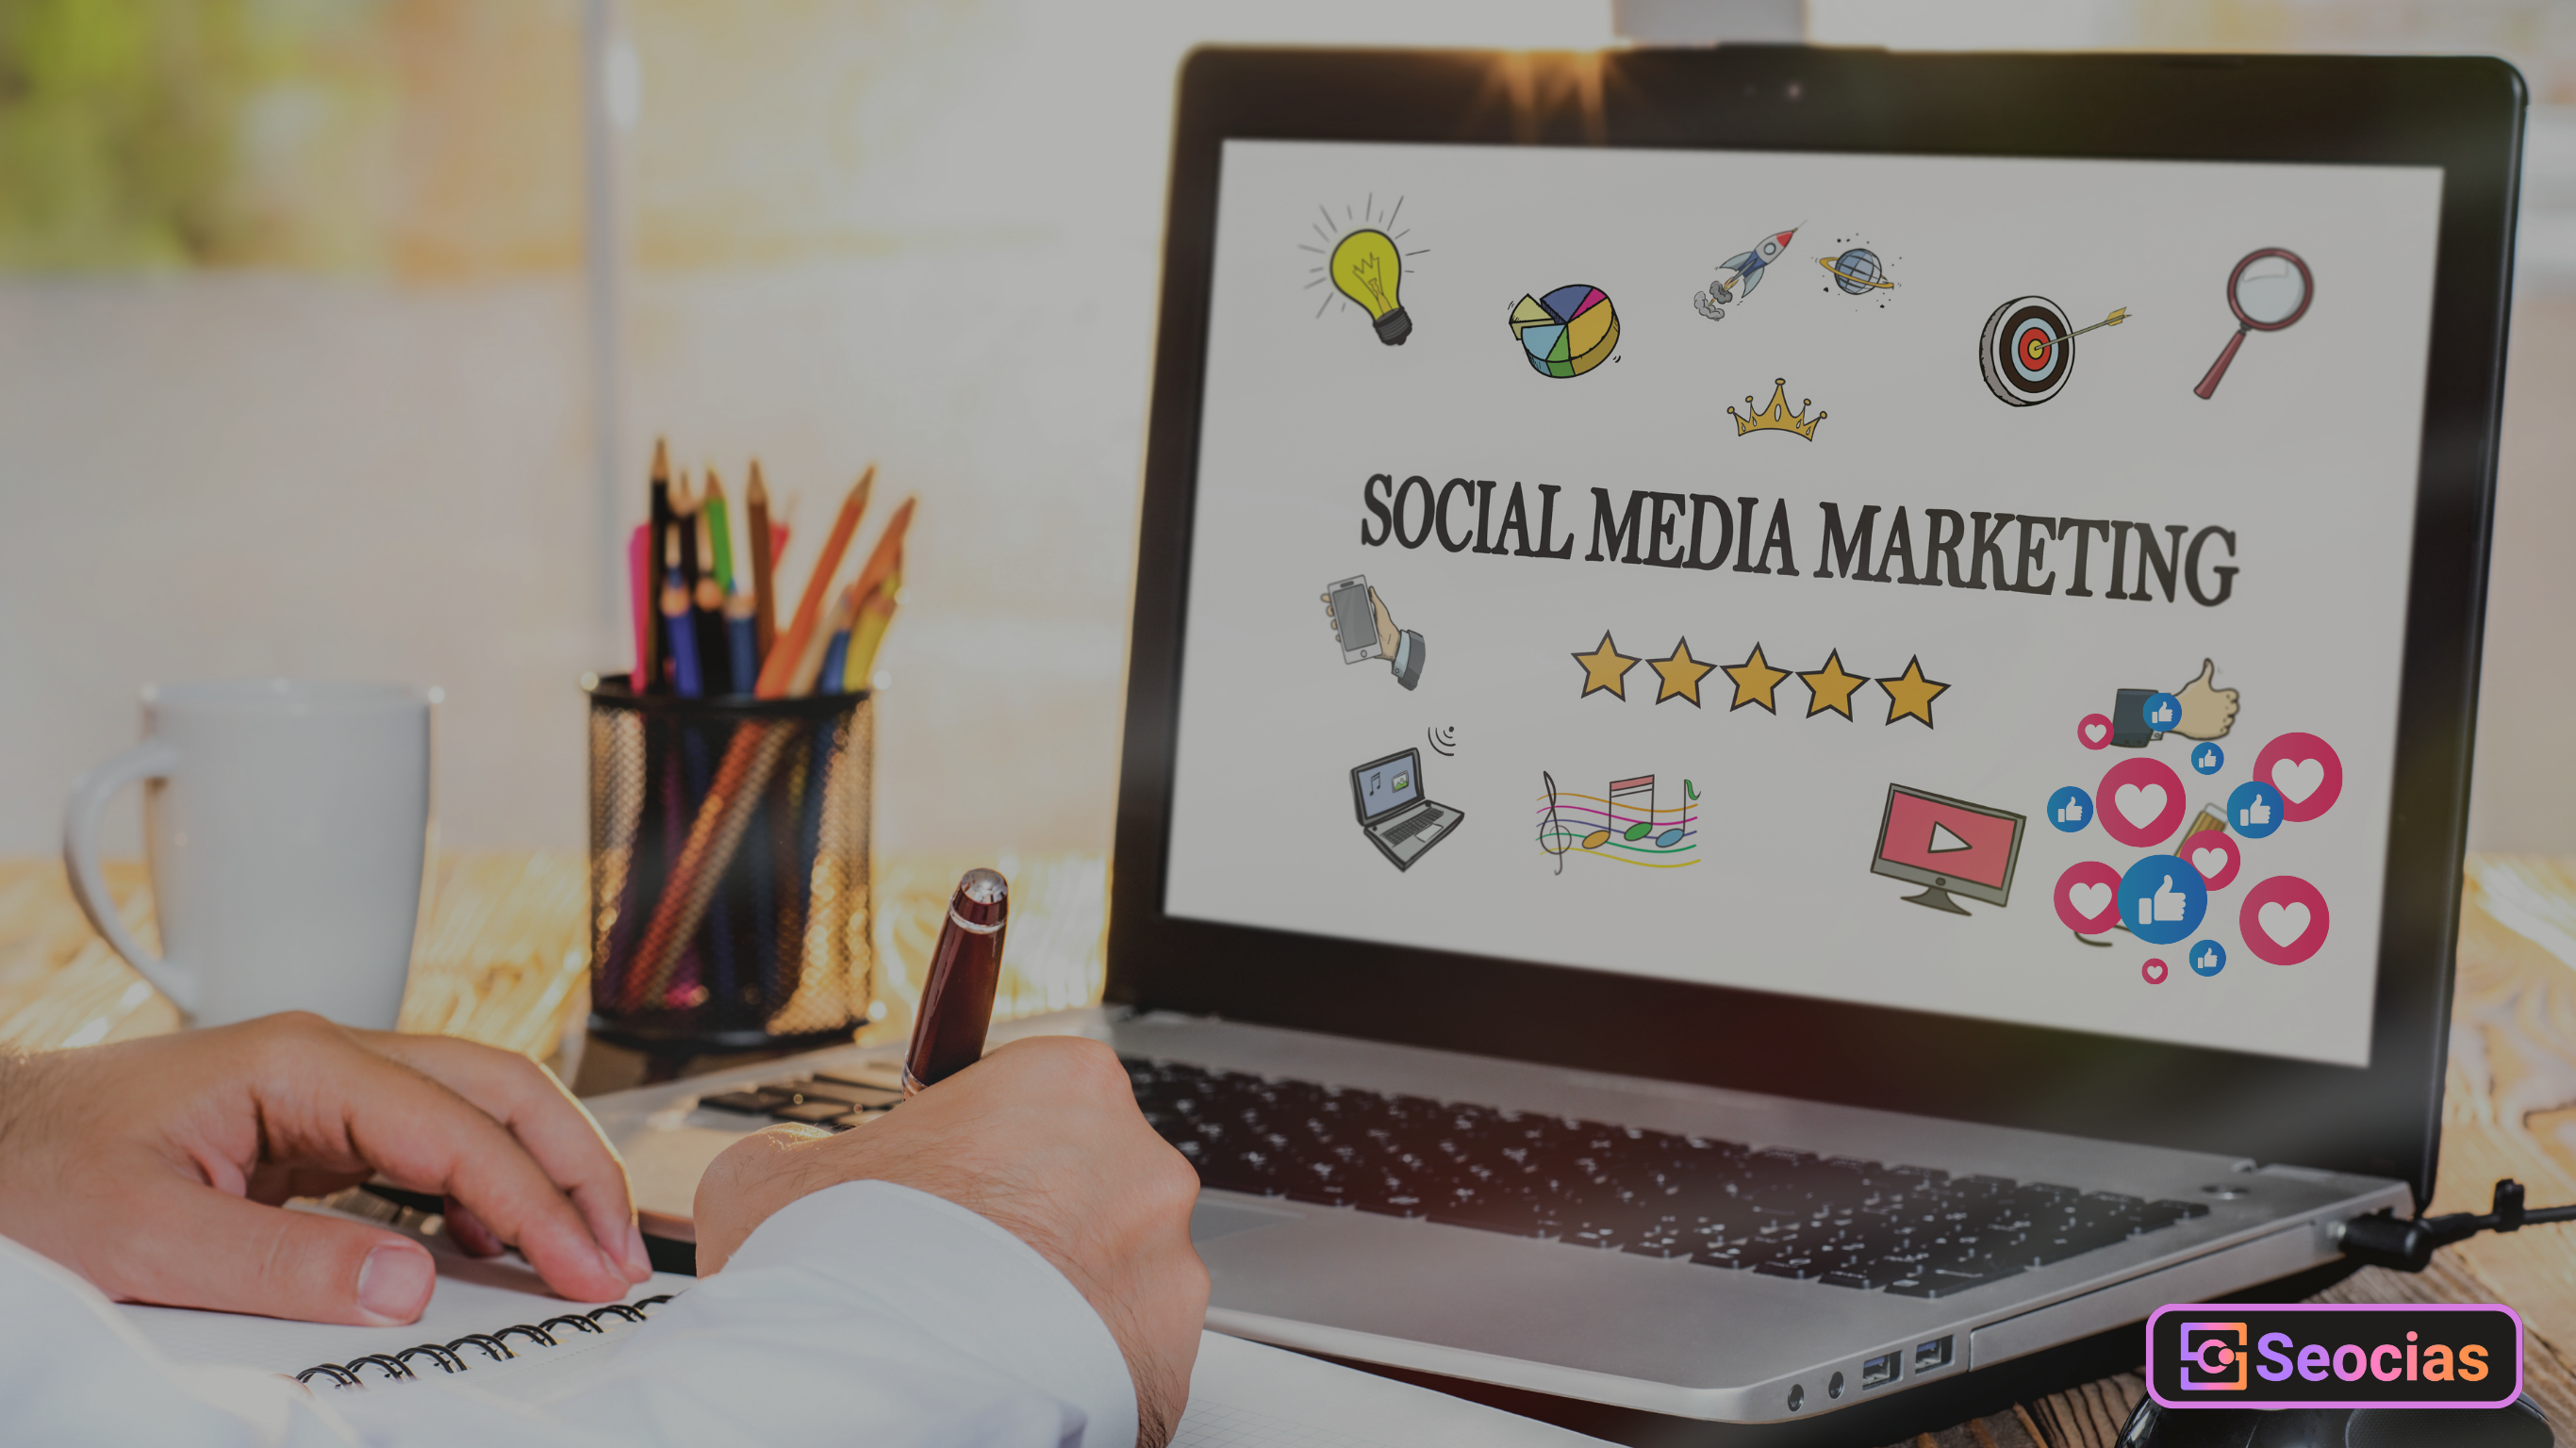 How to Boost Your Social Media Marketing Strategy in 5 Easy Steps